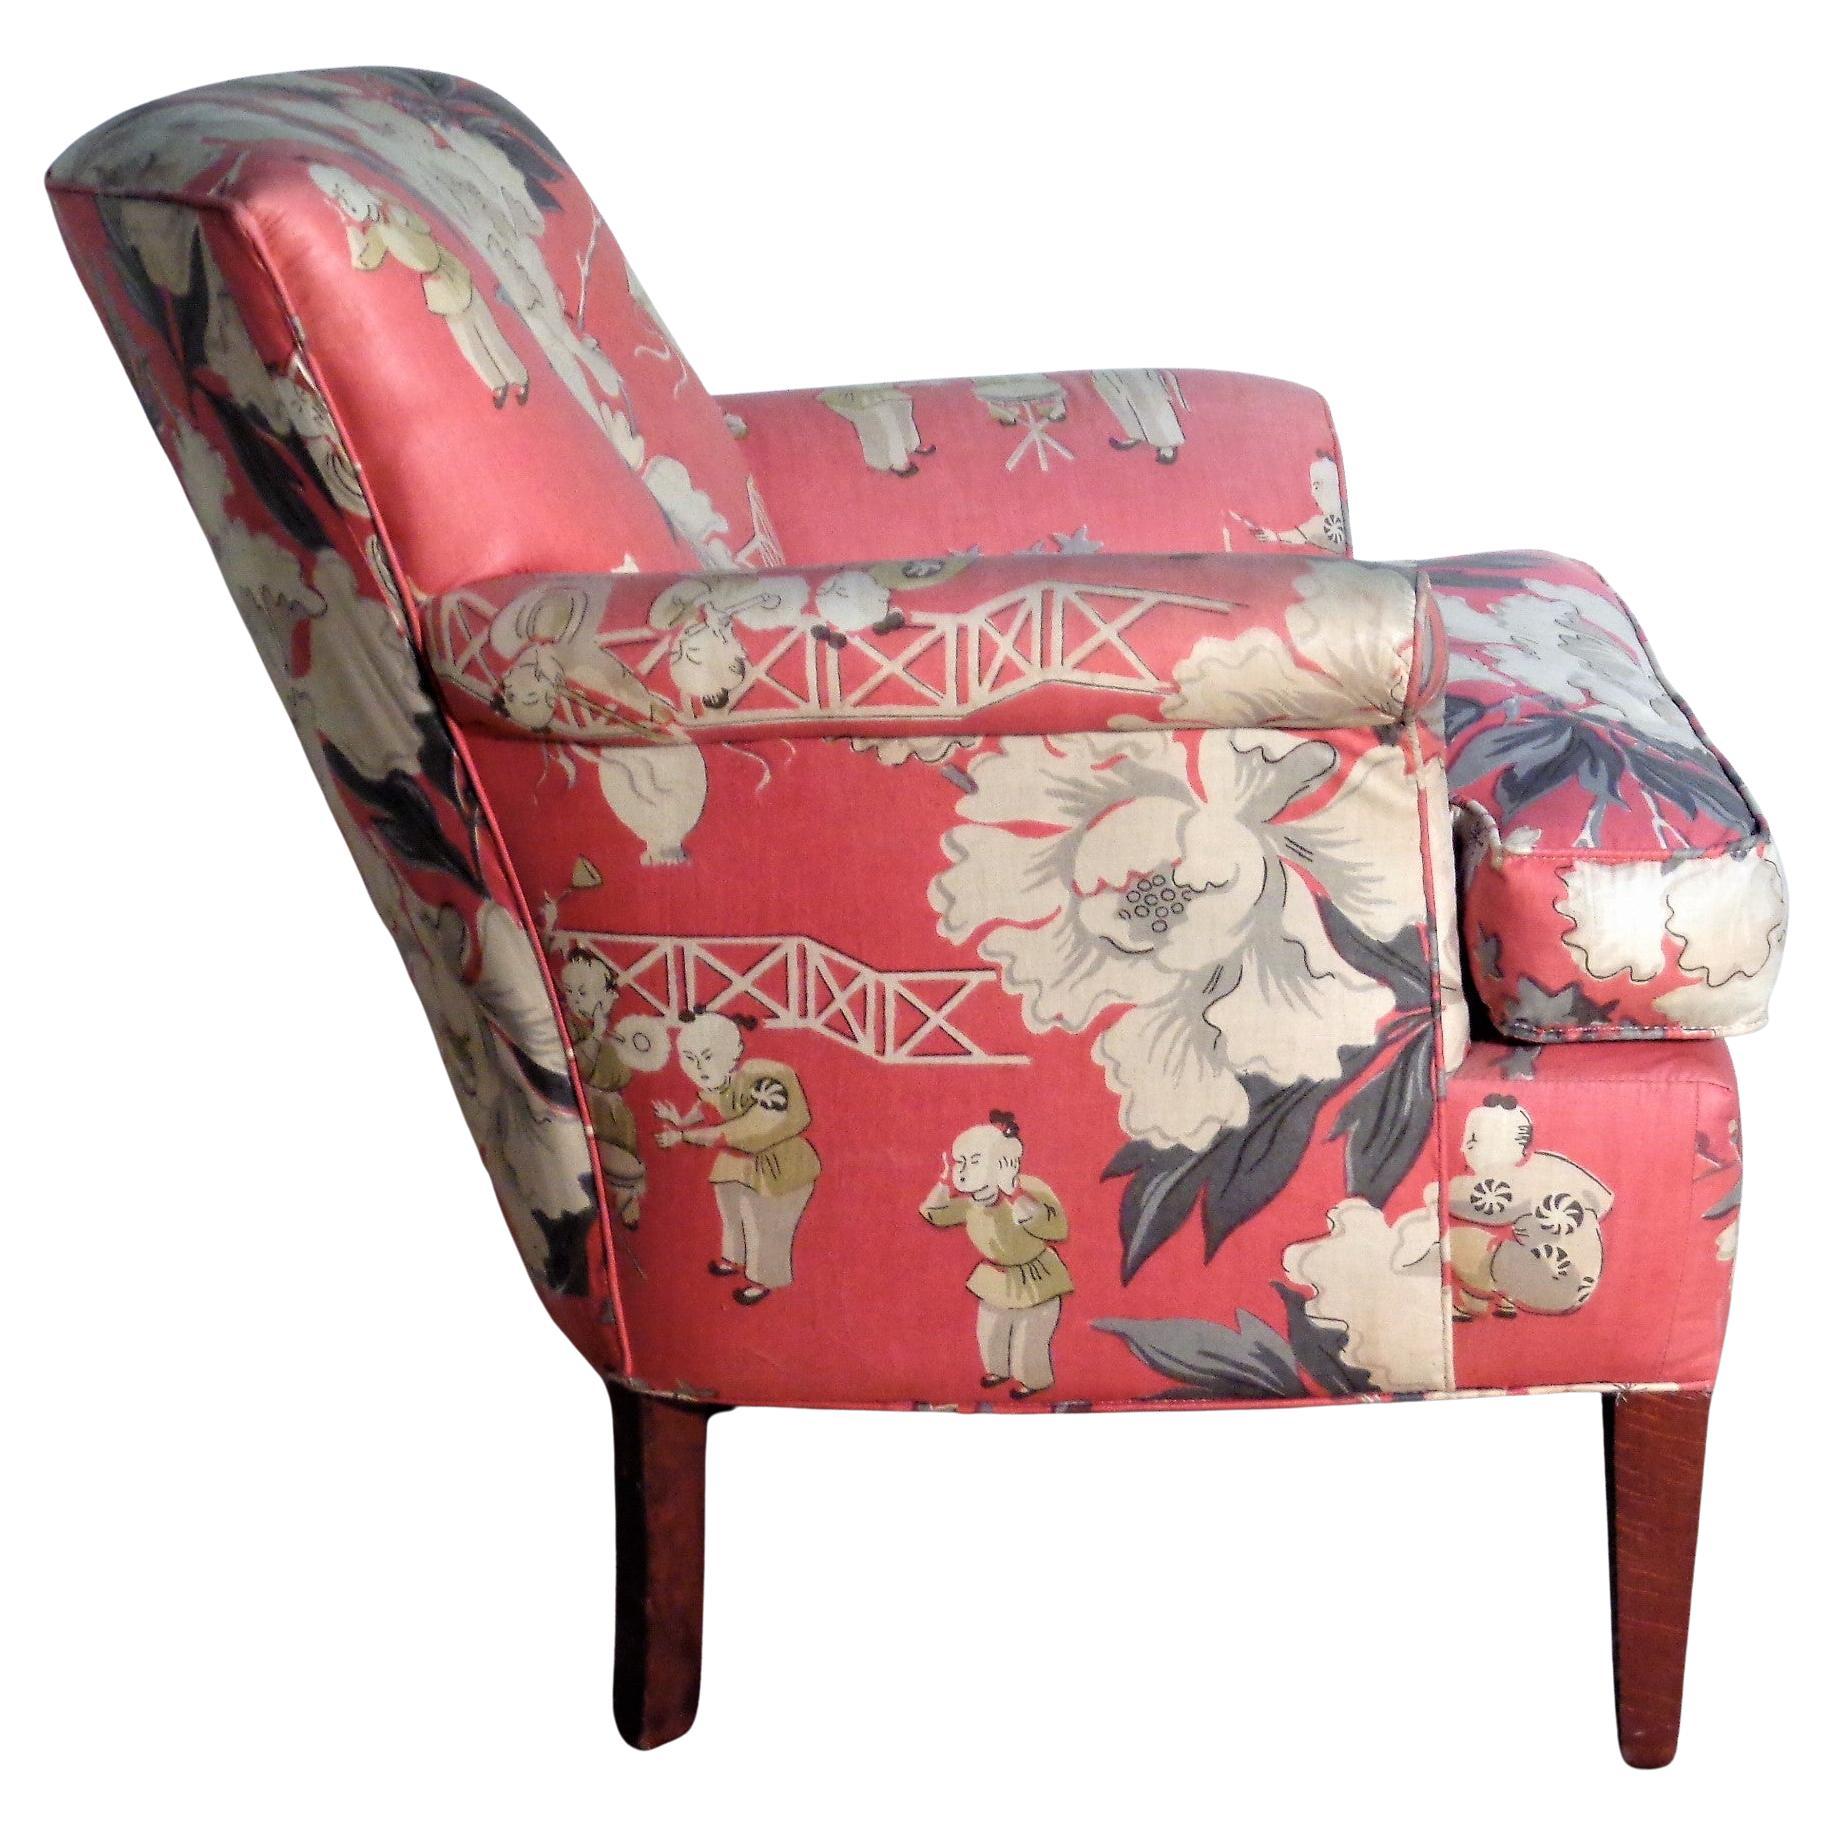  Dorothy Draper Style Original Chinoiserie Upholstered Lounge Chair, 1940's For Sale 4